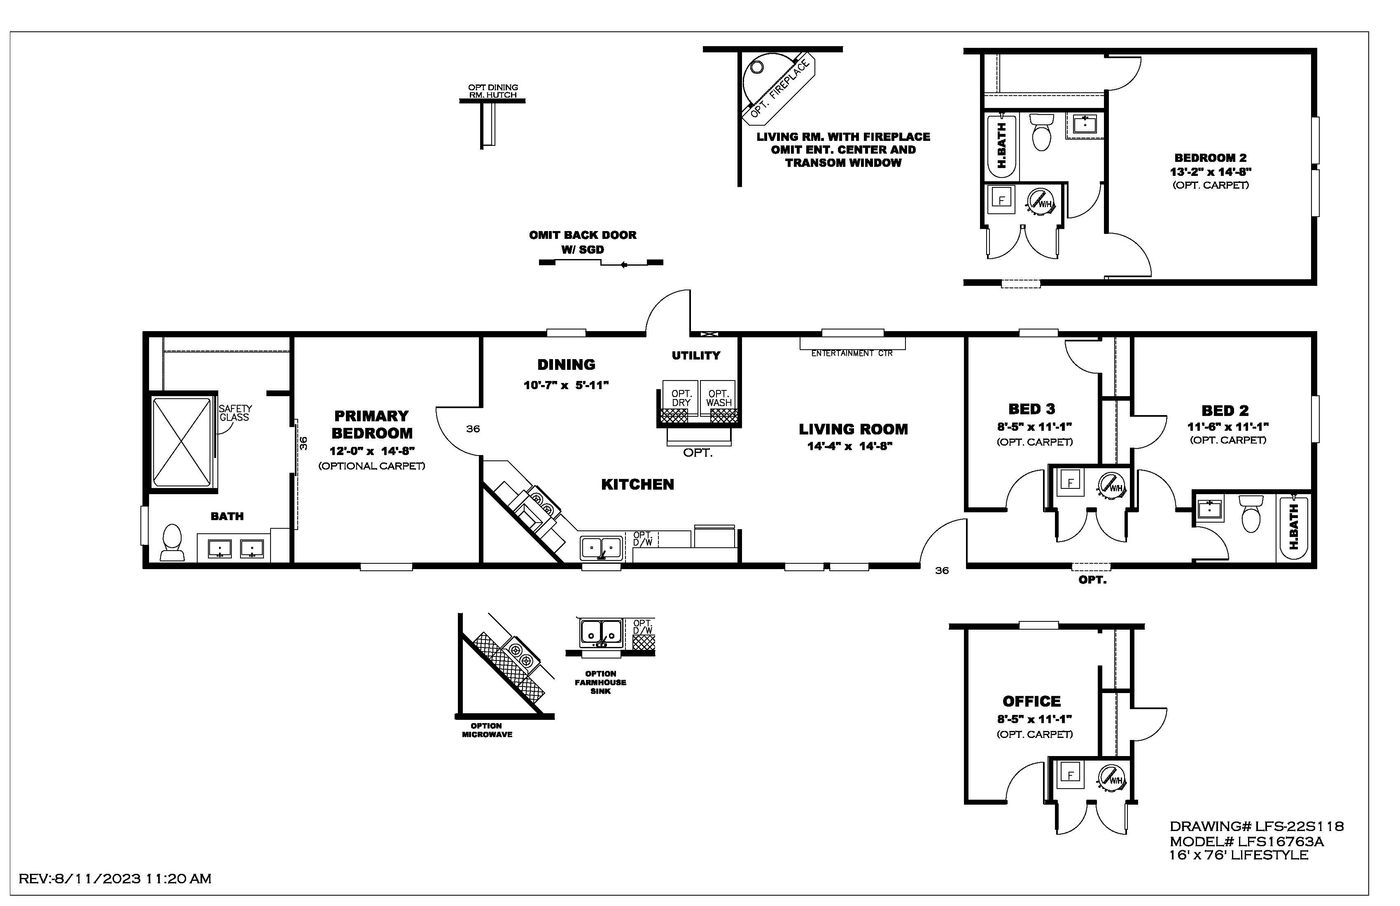 The THE SHOWER HOUSE 2.0 Floor Plan. This Manufactured Mobile Home features 3 bedrooms and 2 baths.